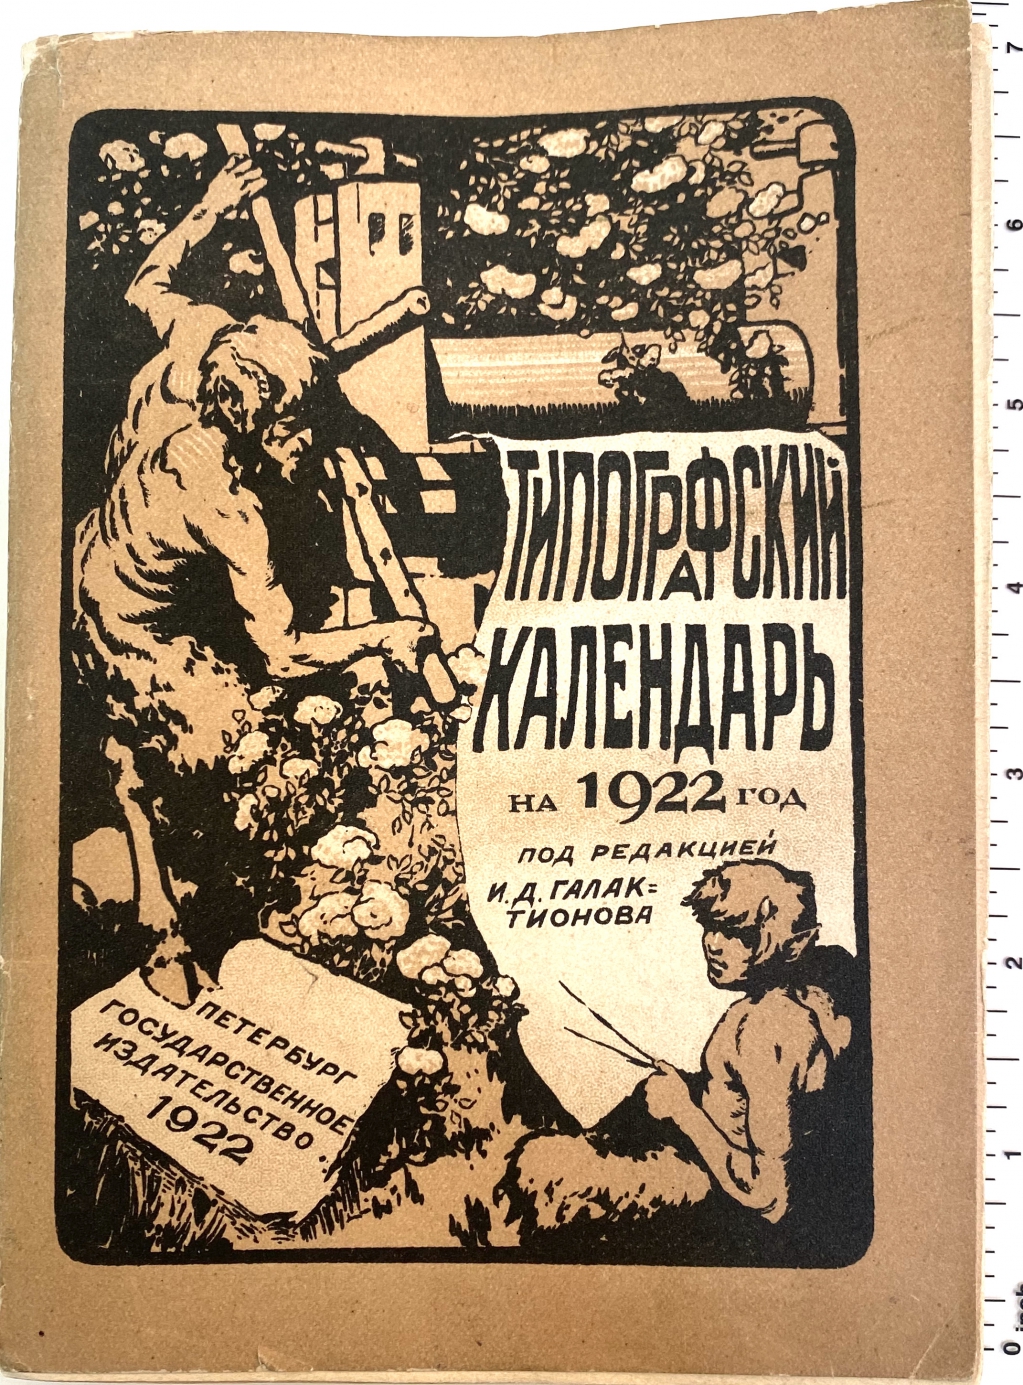 Cover of Galaktionov's typographic calendar printed in St. Petersburg, 1922.